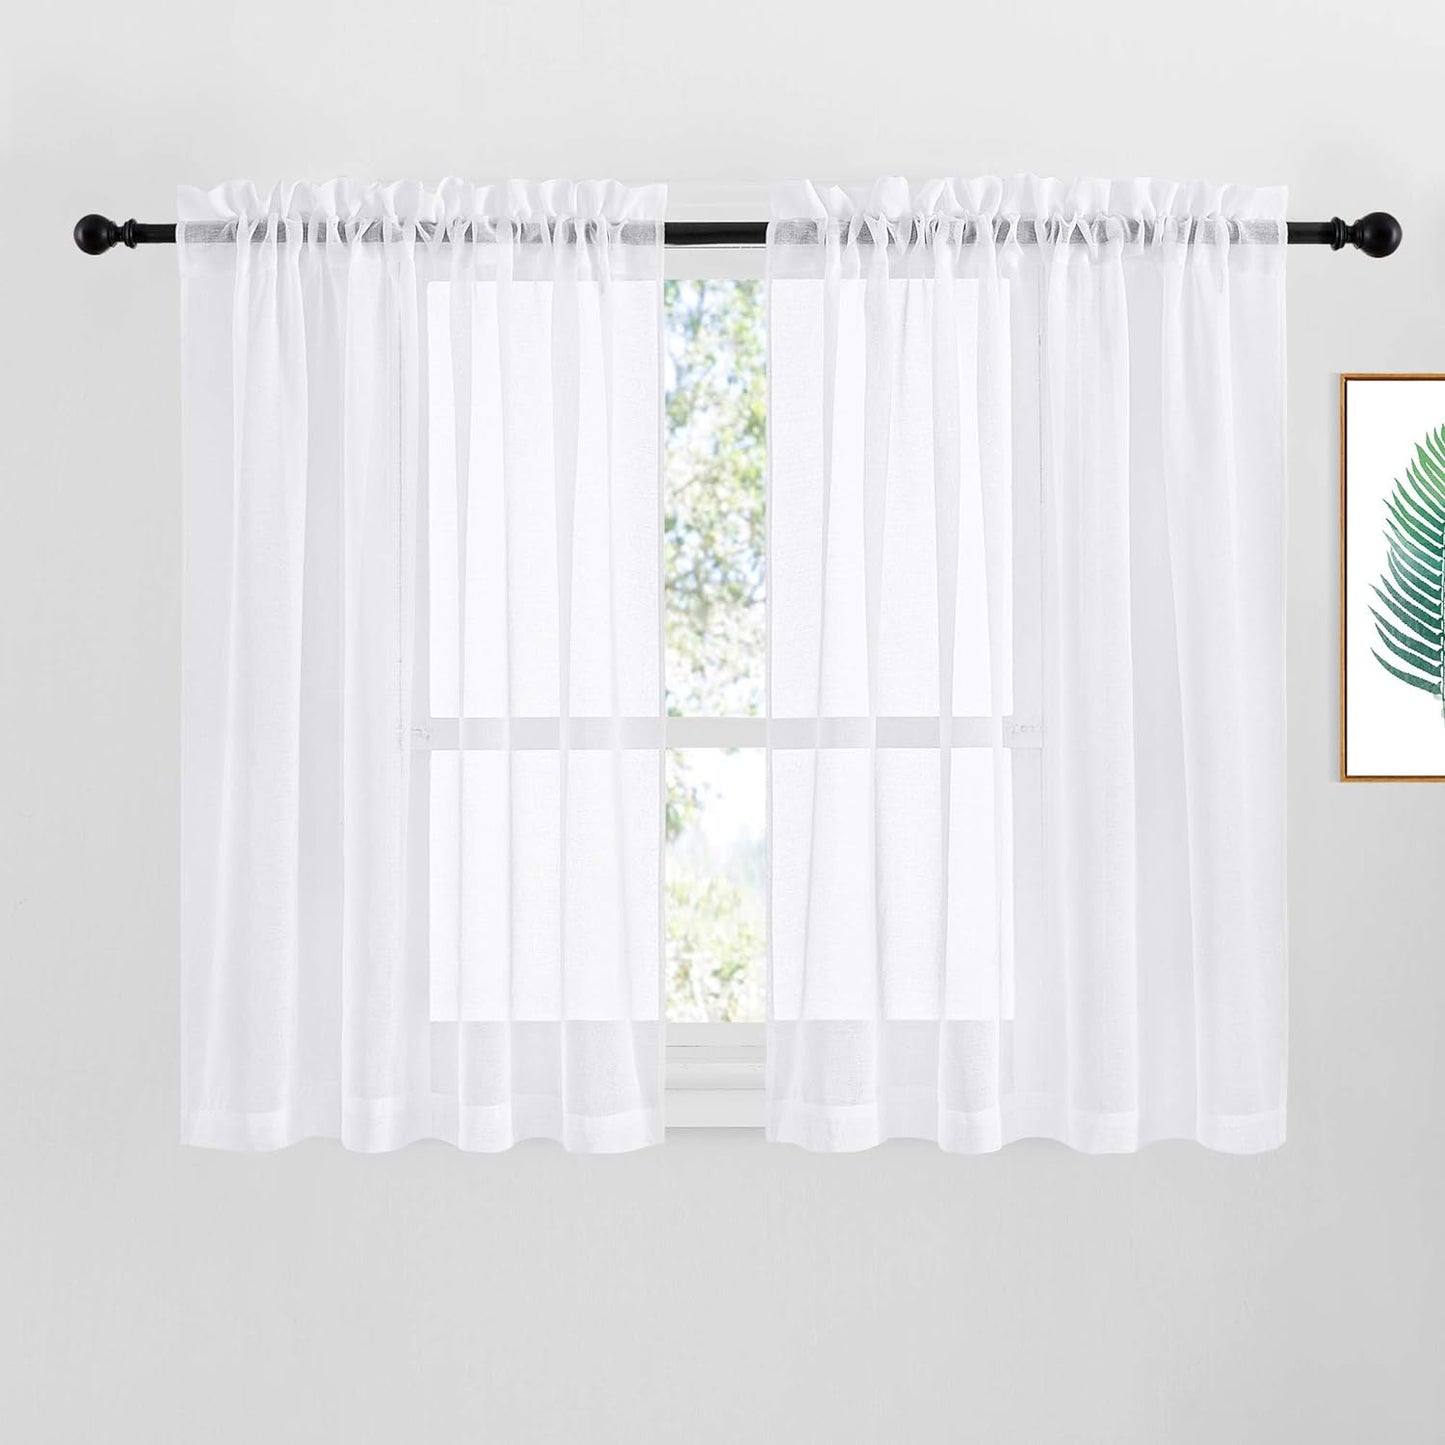 NICETOWN White Semi Sheer Curtains for Living Room- Linen Texture Light Airy Drapes, Rod Pocket & Back Tab Design Voile Panels for Large Window, Set of 2, 55 X 108 Inch  NICETOWN White - Rod Pocket Only W55 X L45 